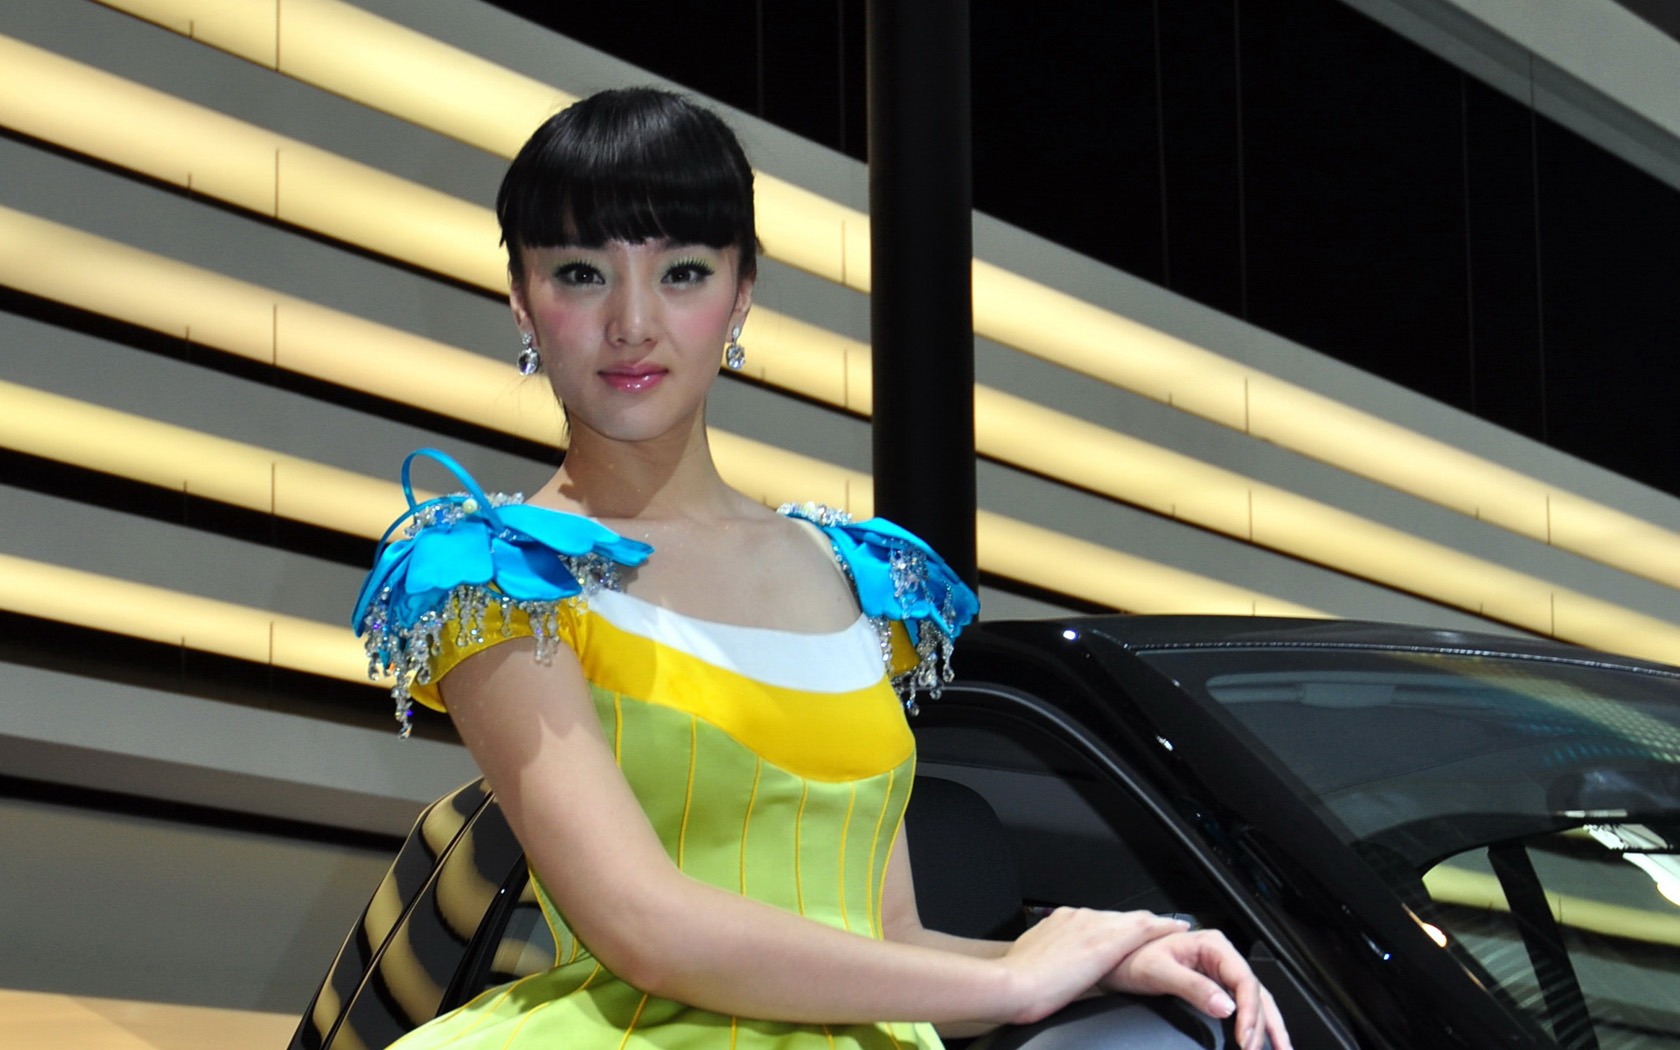 2010 Beijing Auto Show car models Collection (2) #3 - 1680x1050